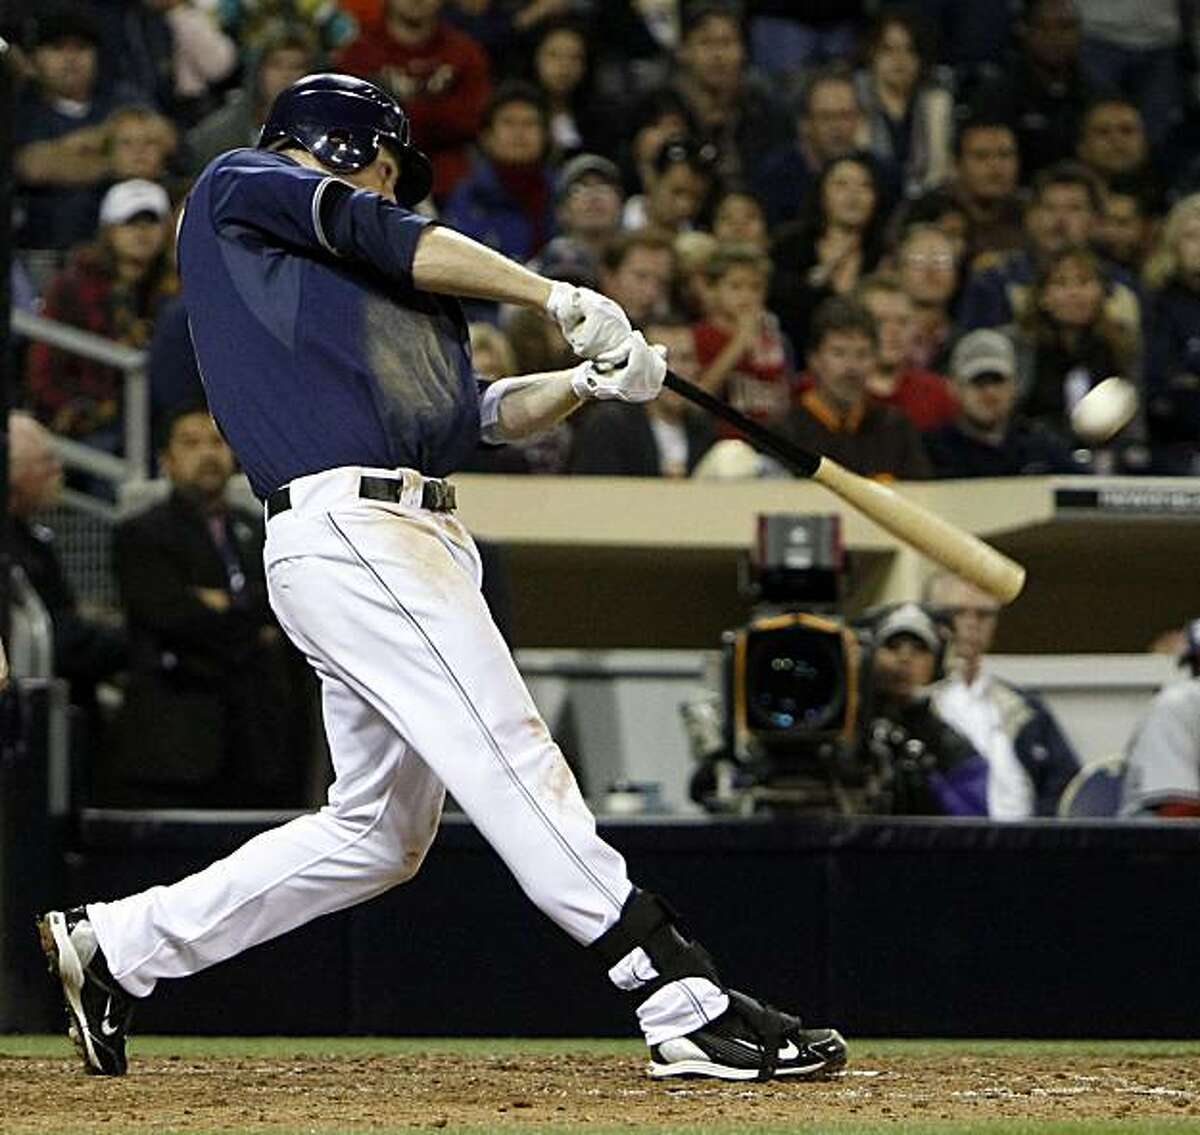 San Diego Padres' Chase Headley connects for a three run homer in the bottom of the ninth inning to give the Padres a 6-3 victory over the Arizona Diamondbacks in a baseball game Friday April 16, 2010 in San Diego.